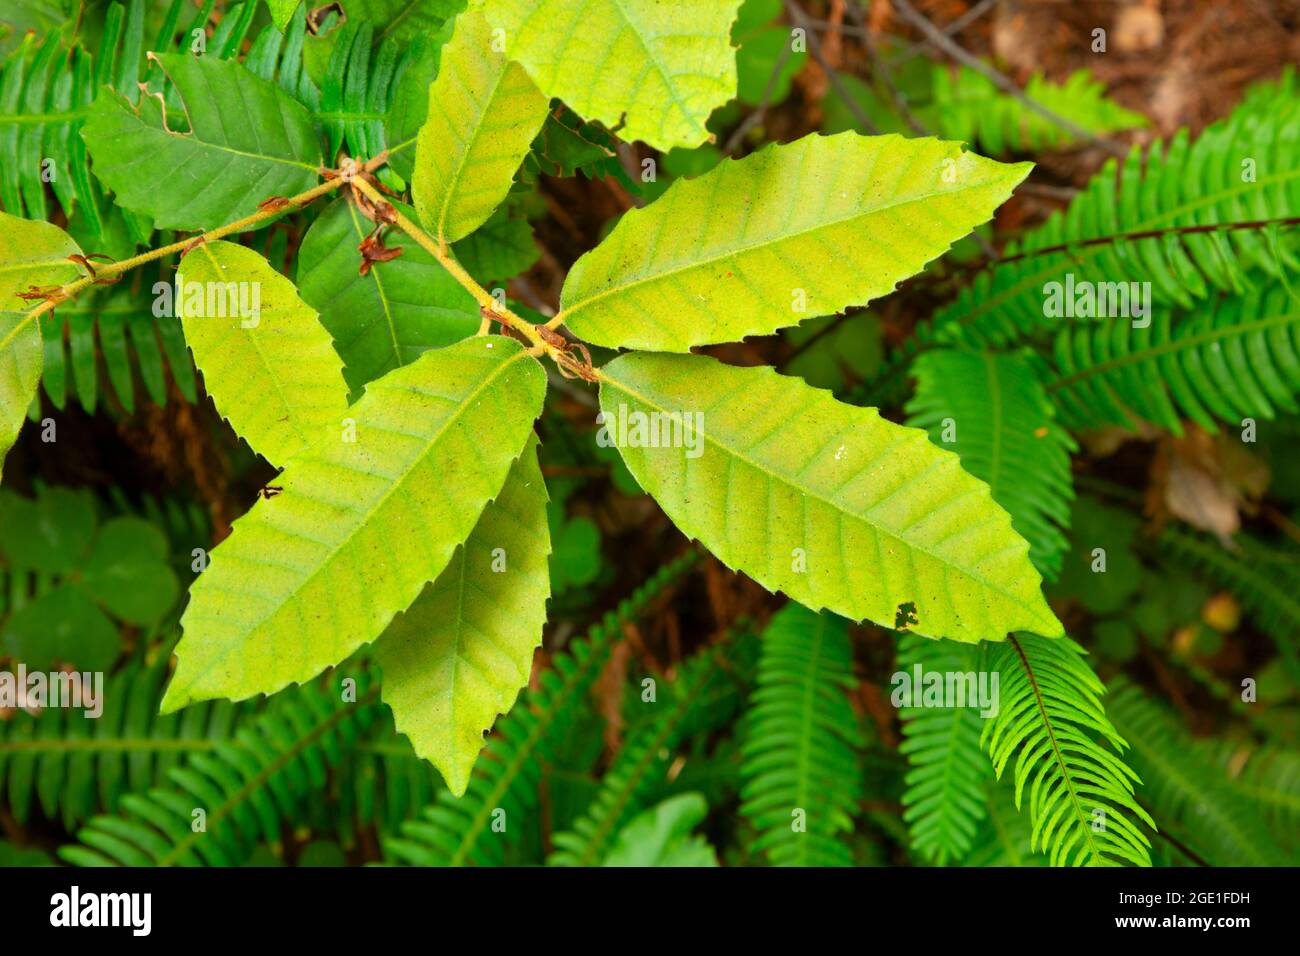 Tanoak leaves along Wellman Loop Trail, Jedediah Smith Redwoods State Park, Redwood National Park, California Stock Photo